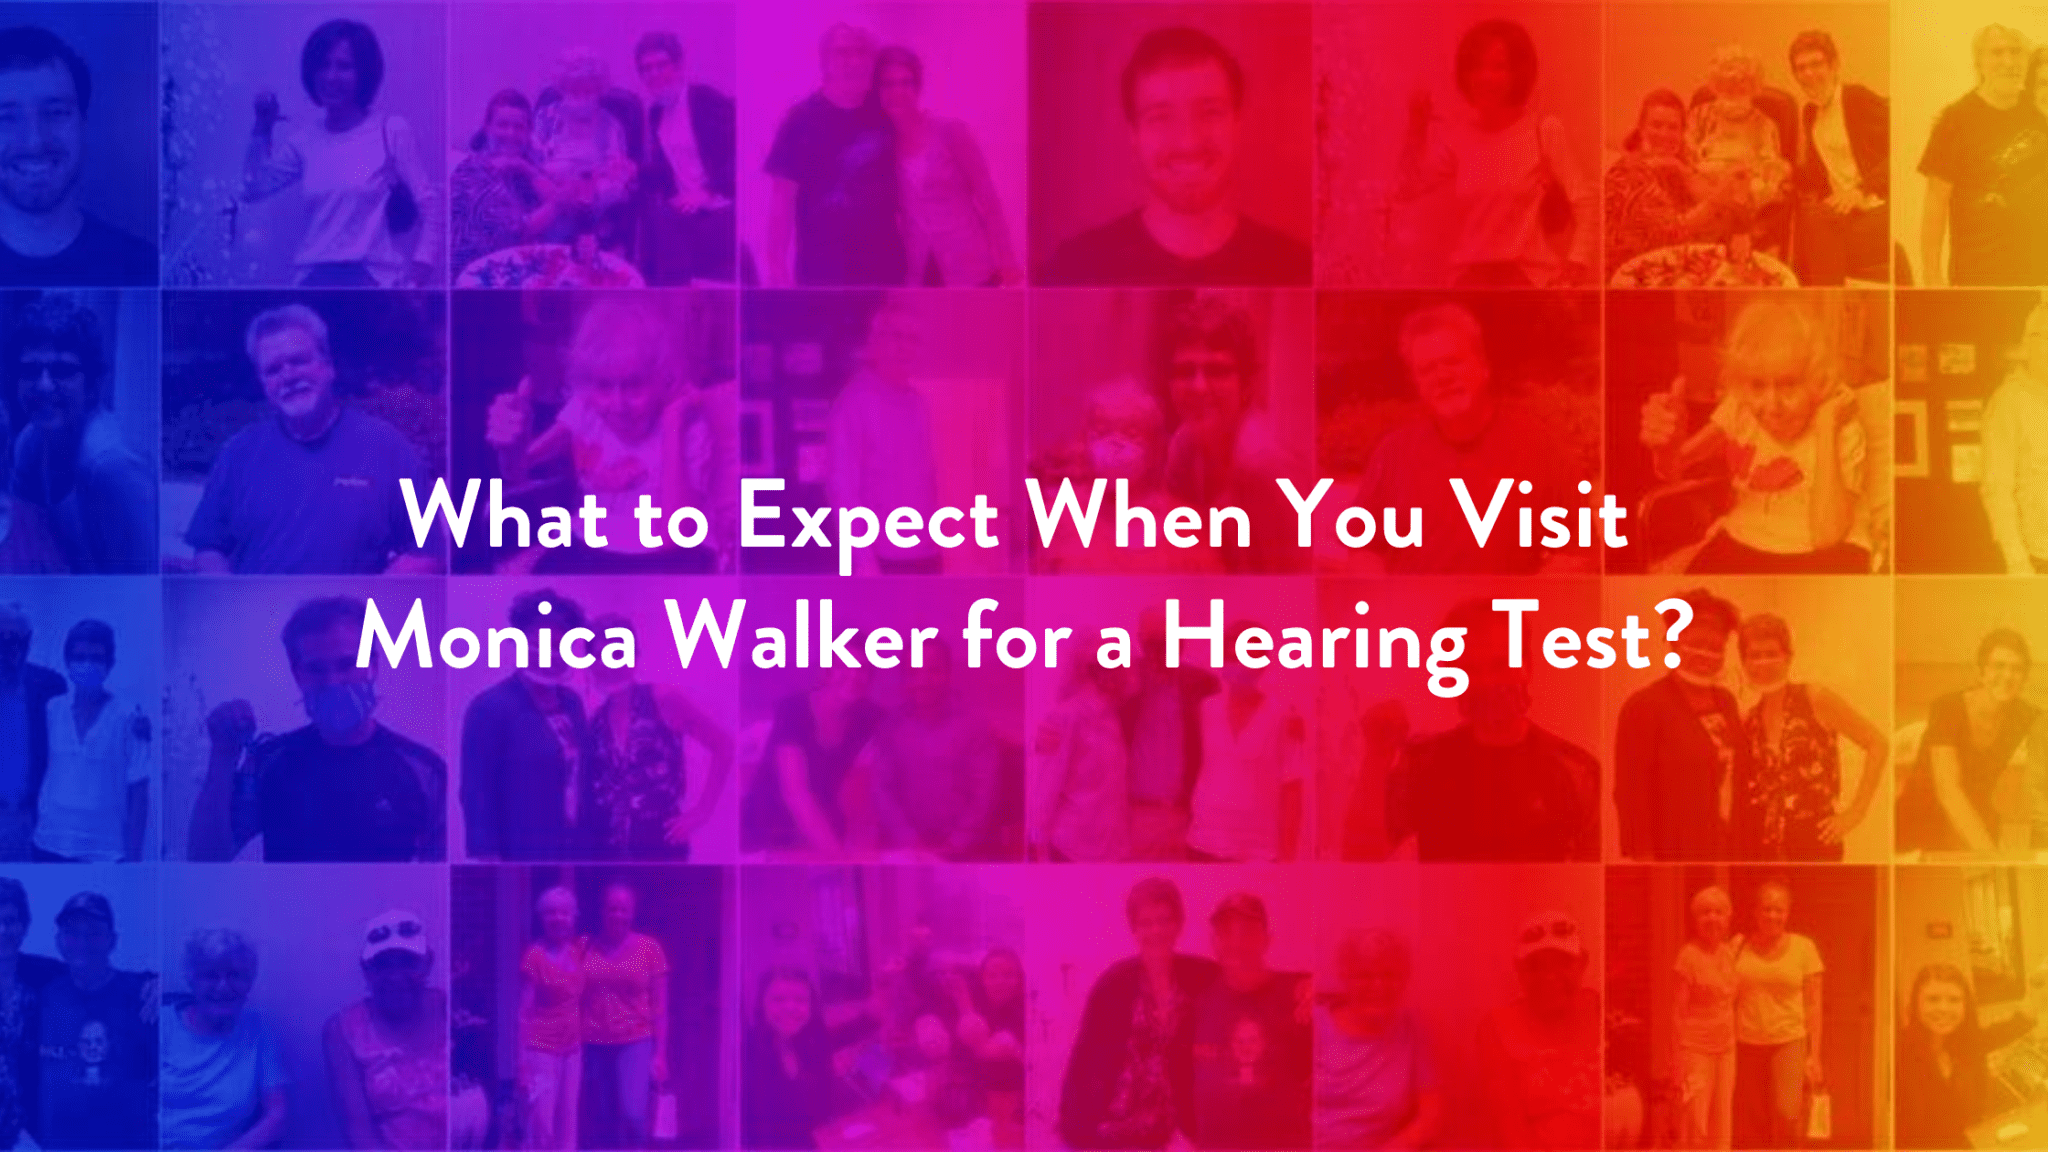 What to Expect When You Visit Monica Walker for a Hearing Test?